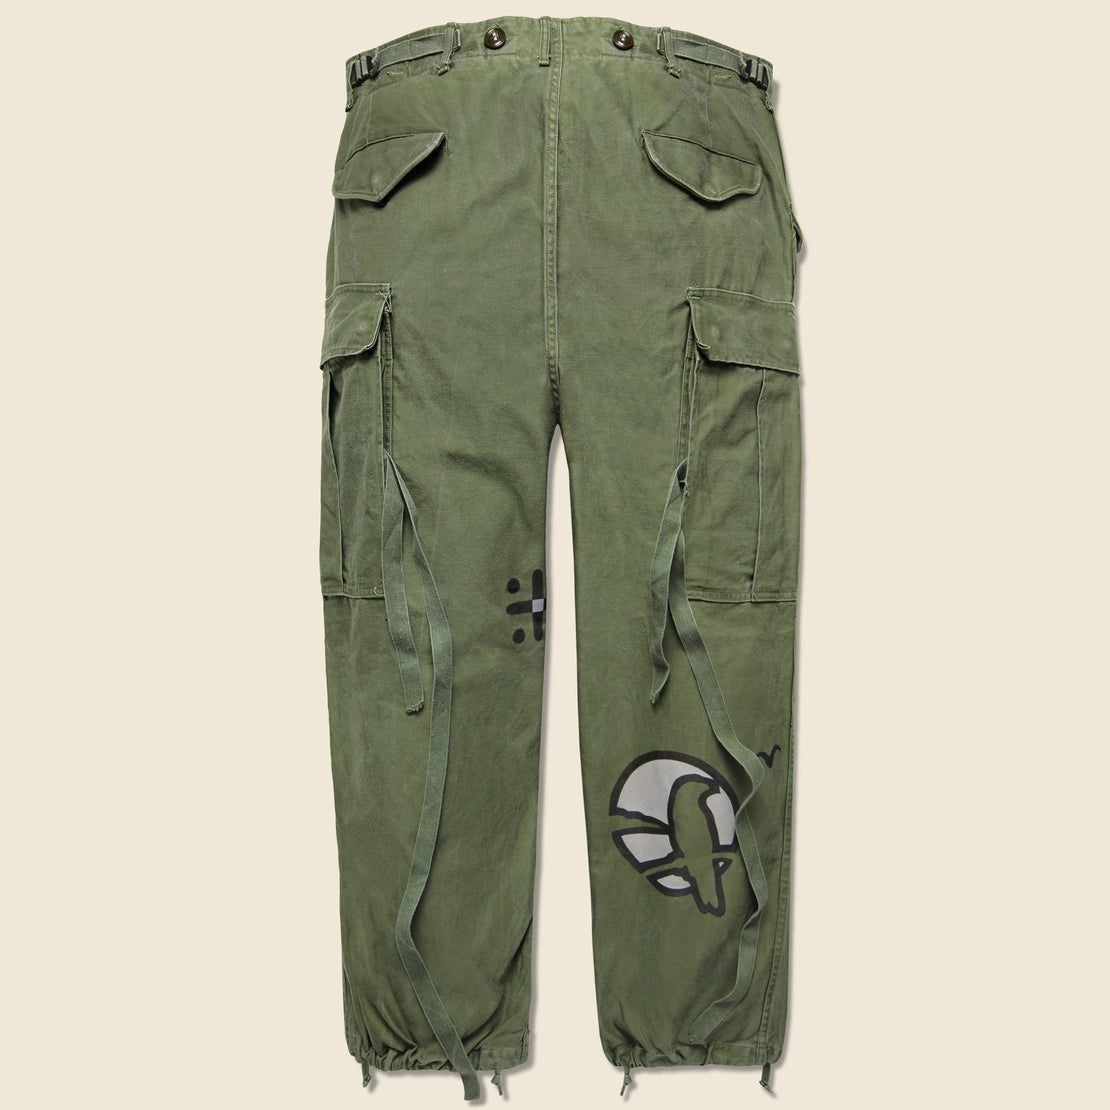 Vintage Military-Issued Field Pants - All Seeing Eye - Tom Jean Webb - STAG Provisions - One & Done - Apparel